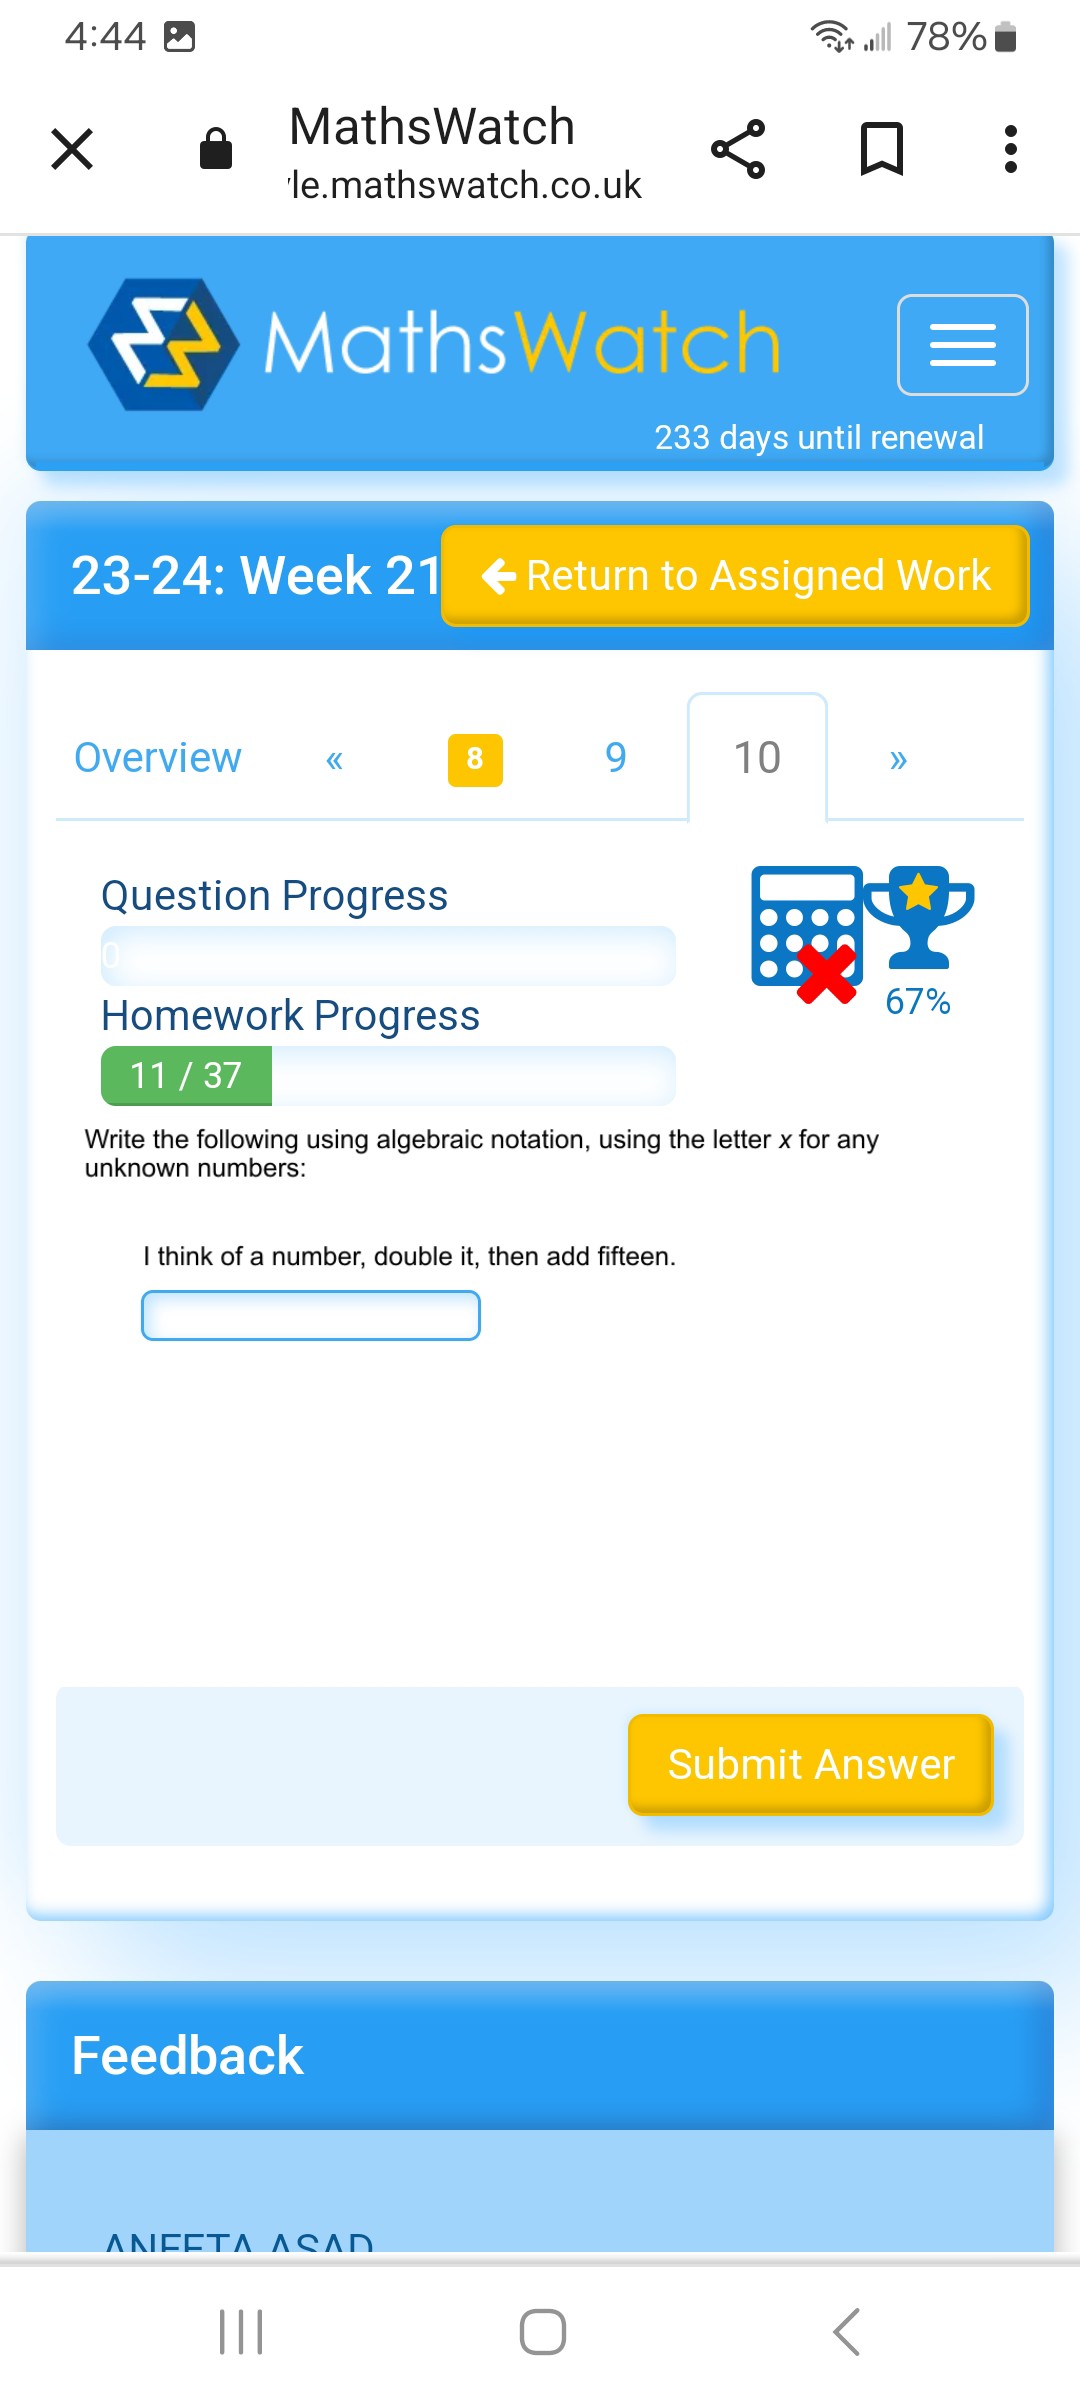 the-higher-worksheets-ebook-answers